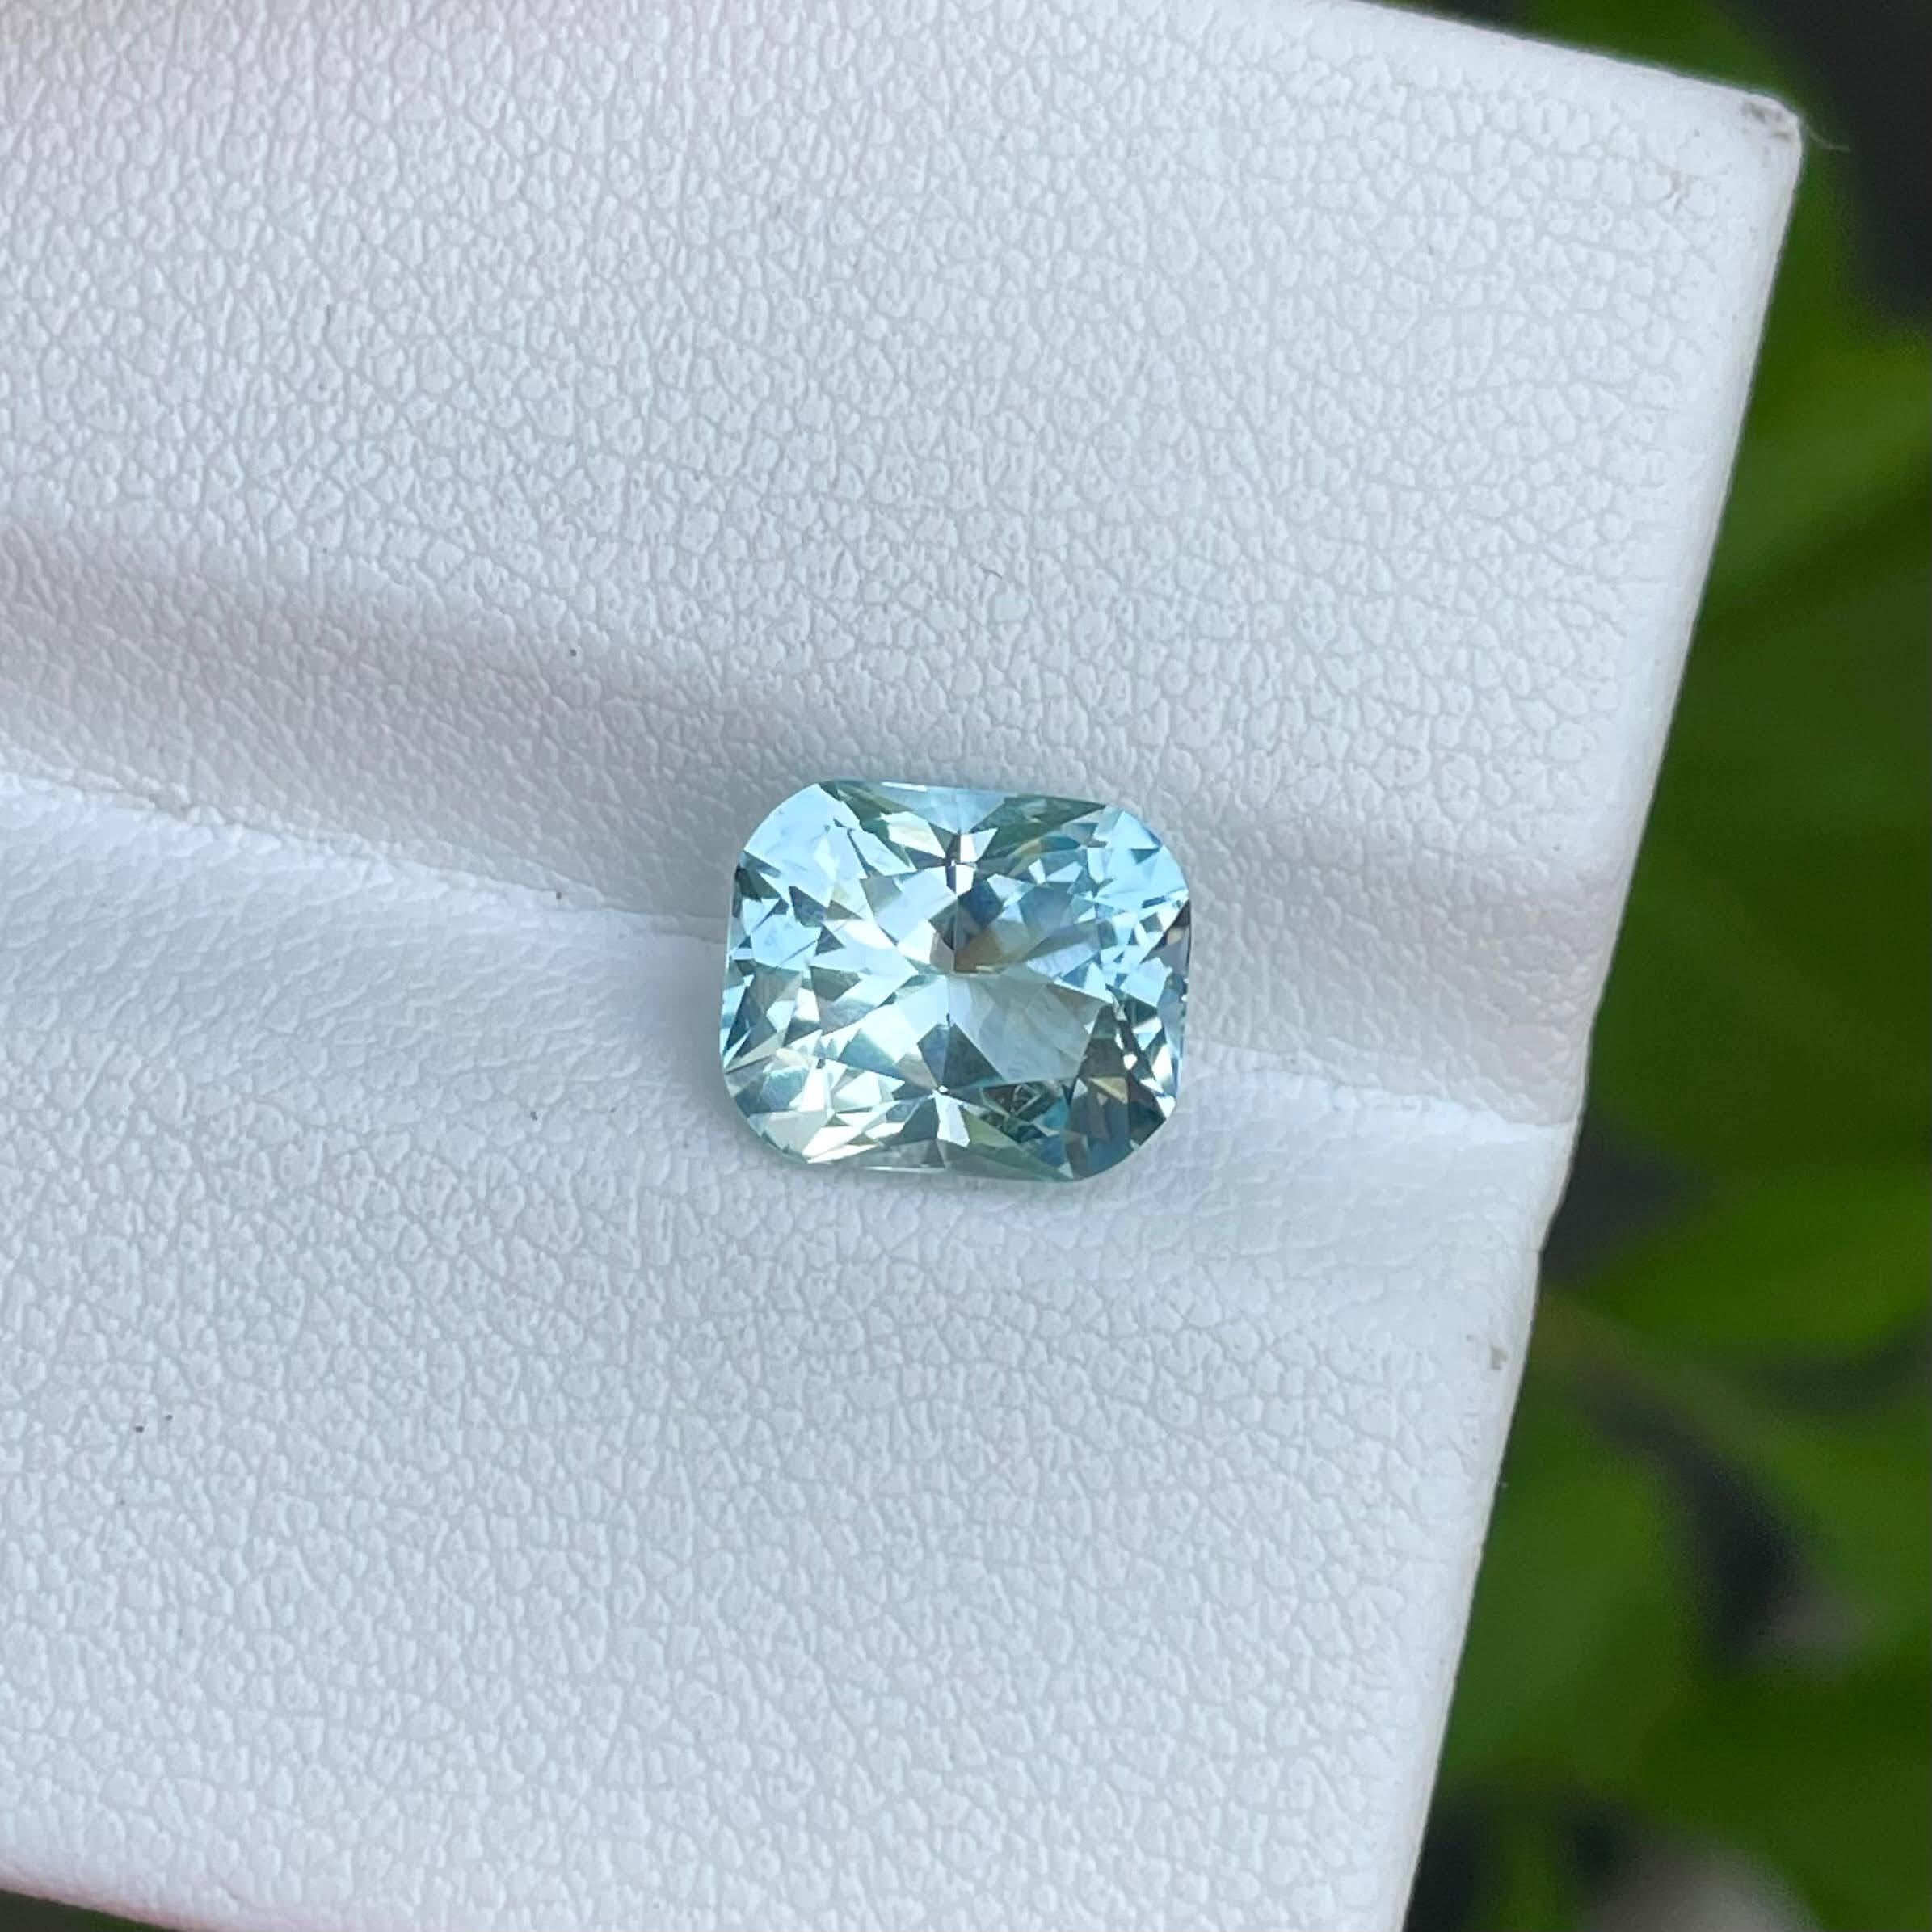 Weight 2.55 carats 
Dimensions 8.9x7.4x5.71 mm
Treatment none 
Origin Nigeria 
Clarity VVS
Shape cushion 
Cut modified cushion 





A stunning piece of natural beauty, this Sea Blue Aquamarine gemstone weighs an exquisite 2.55 carats and boasts a